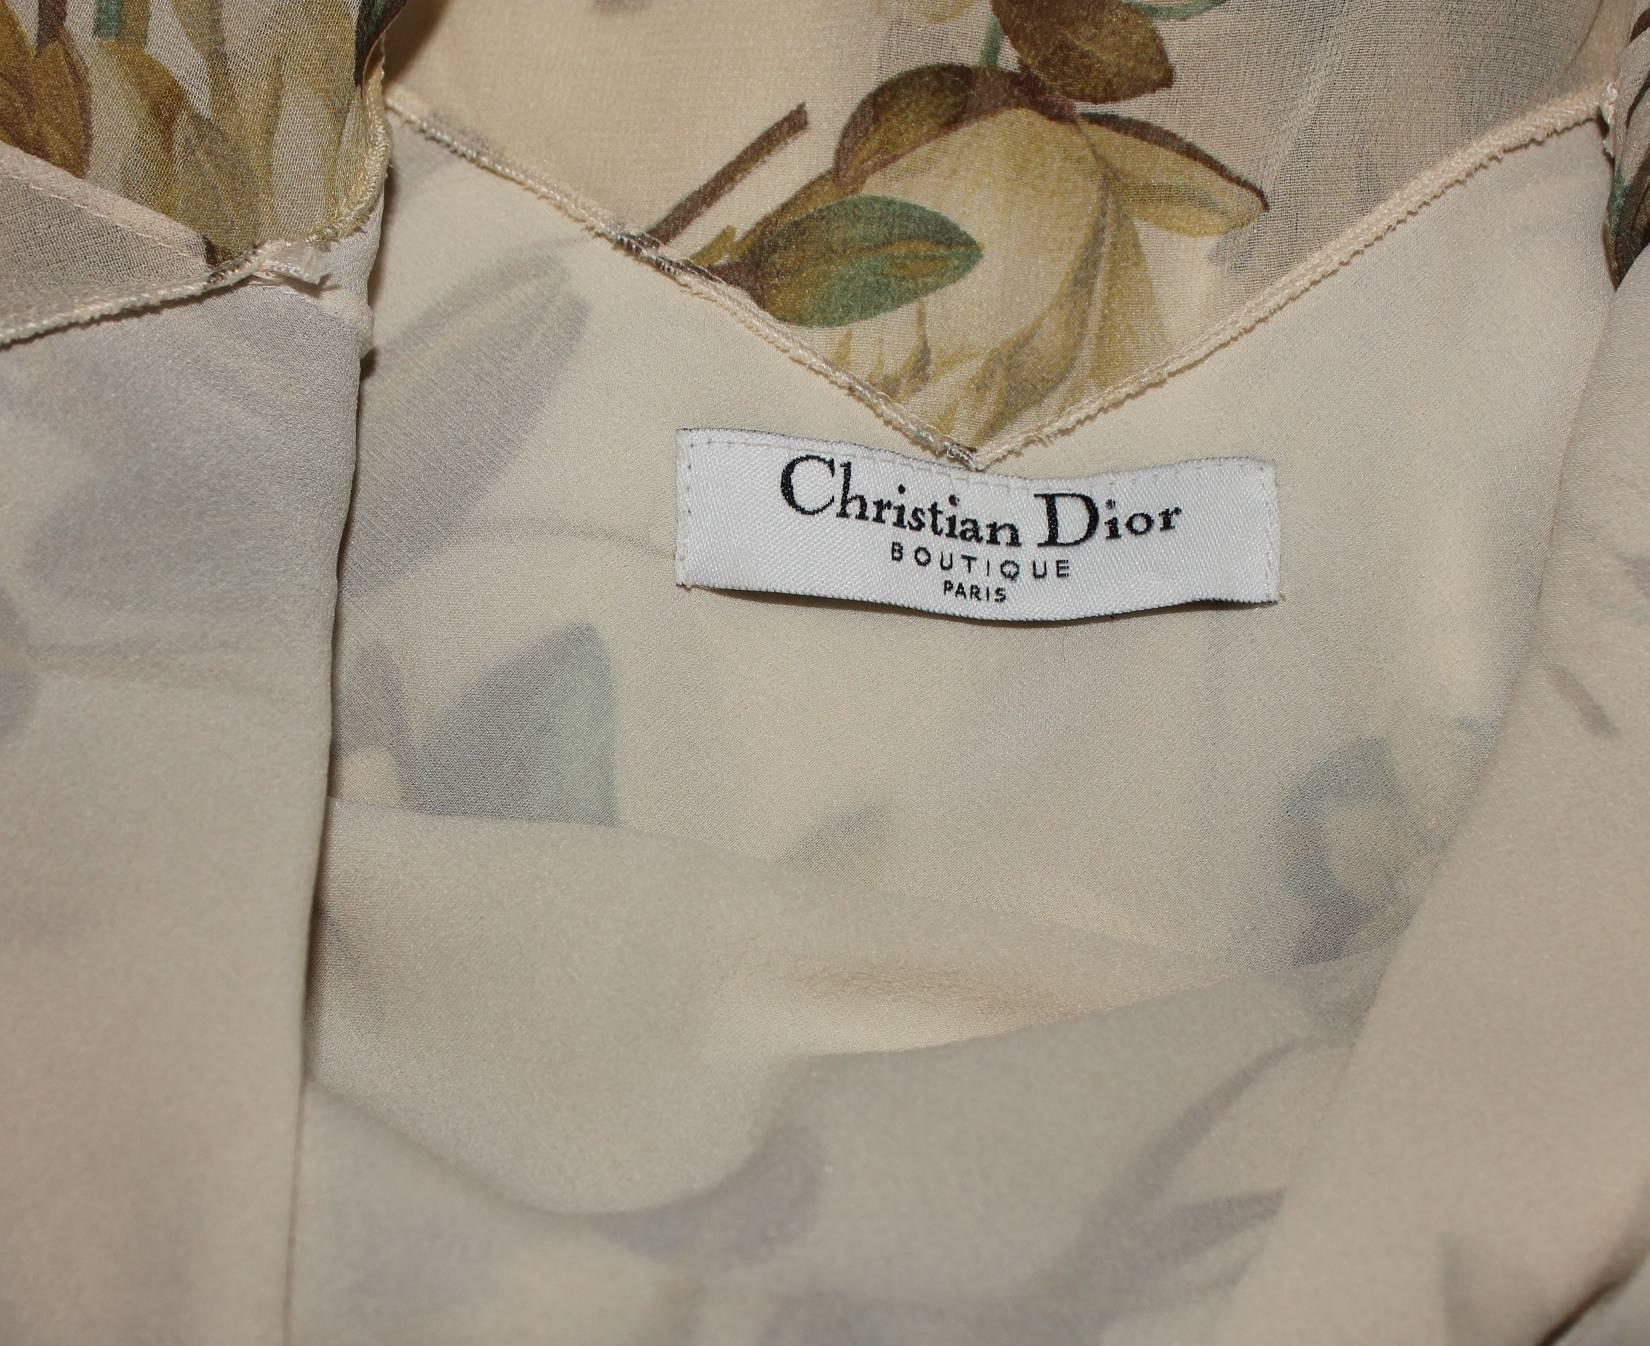 Christian Dior Floral Silk Evening Dress Gown with Matching Silk Stola Shawl  4